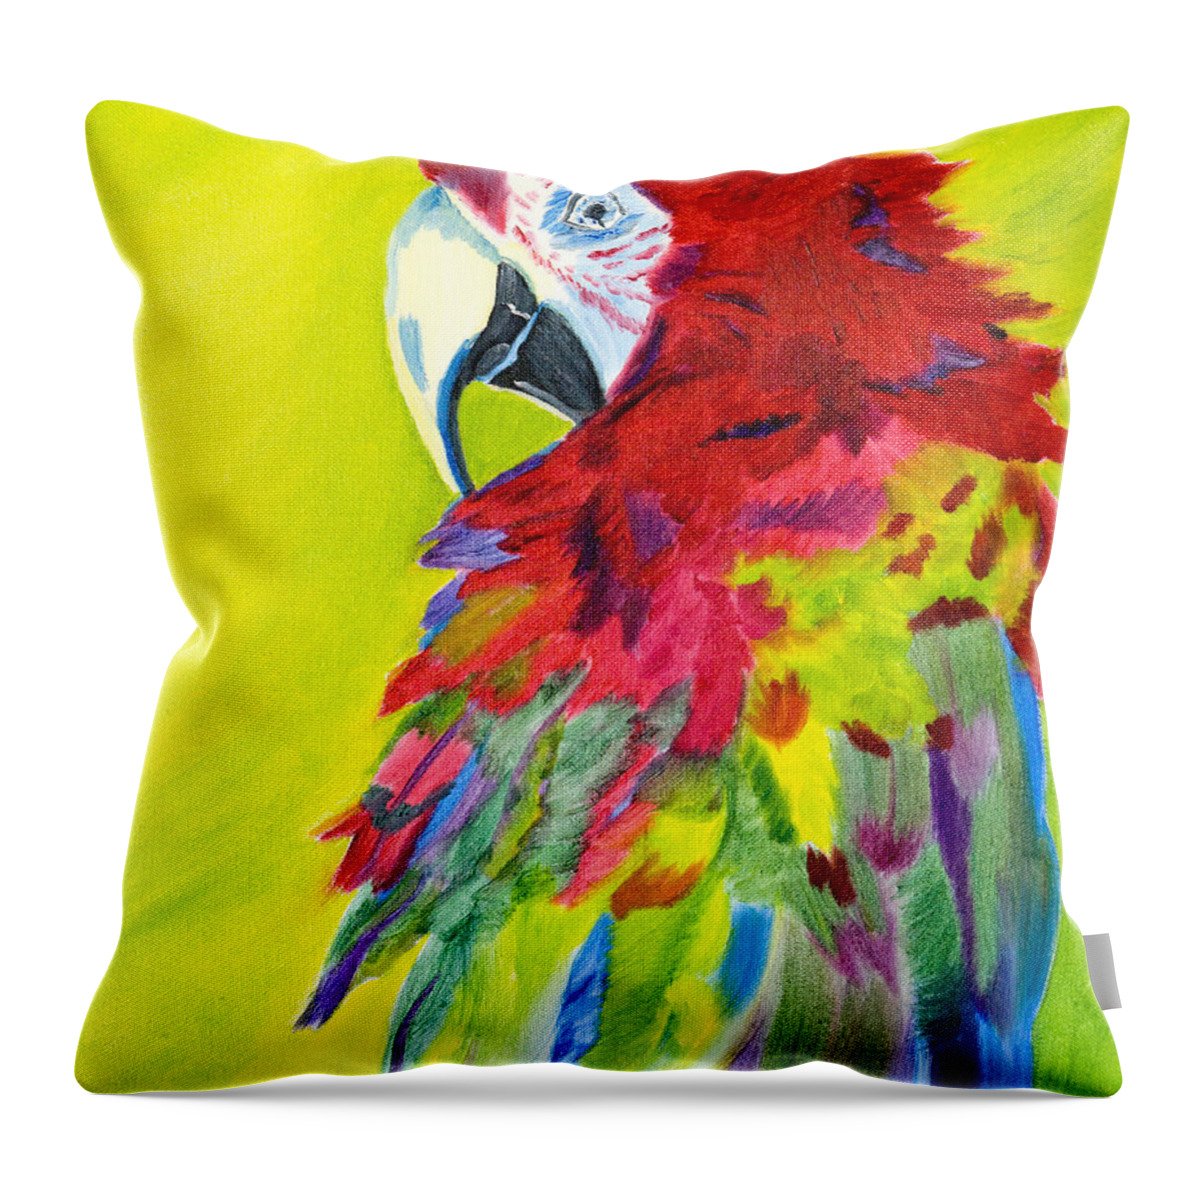 Red Parrot Throw Pillow featuring the painting Fiery Feathers by Meryl Goudey